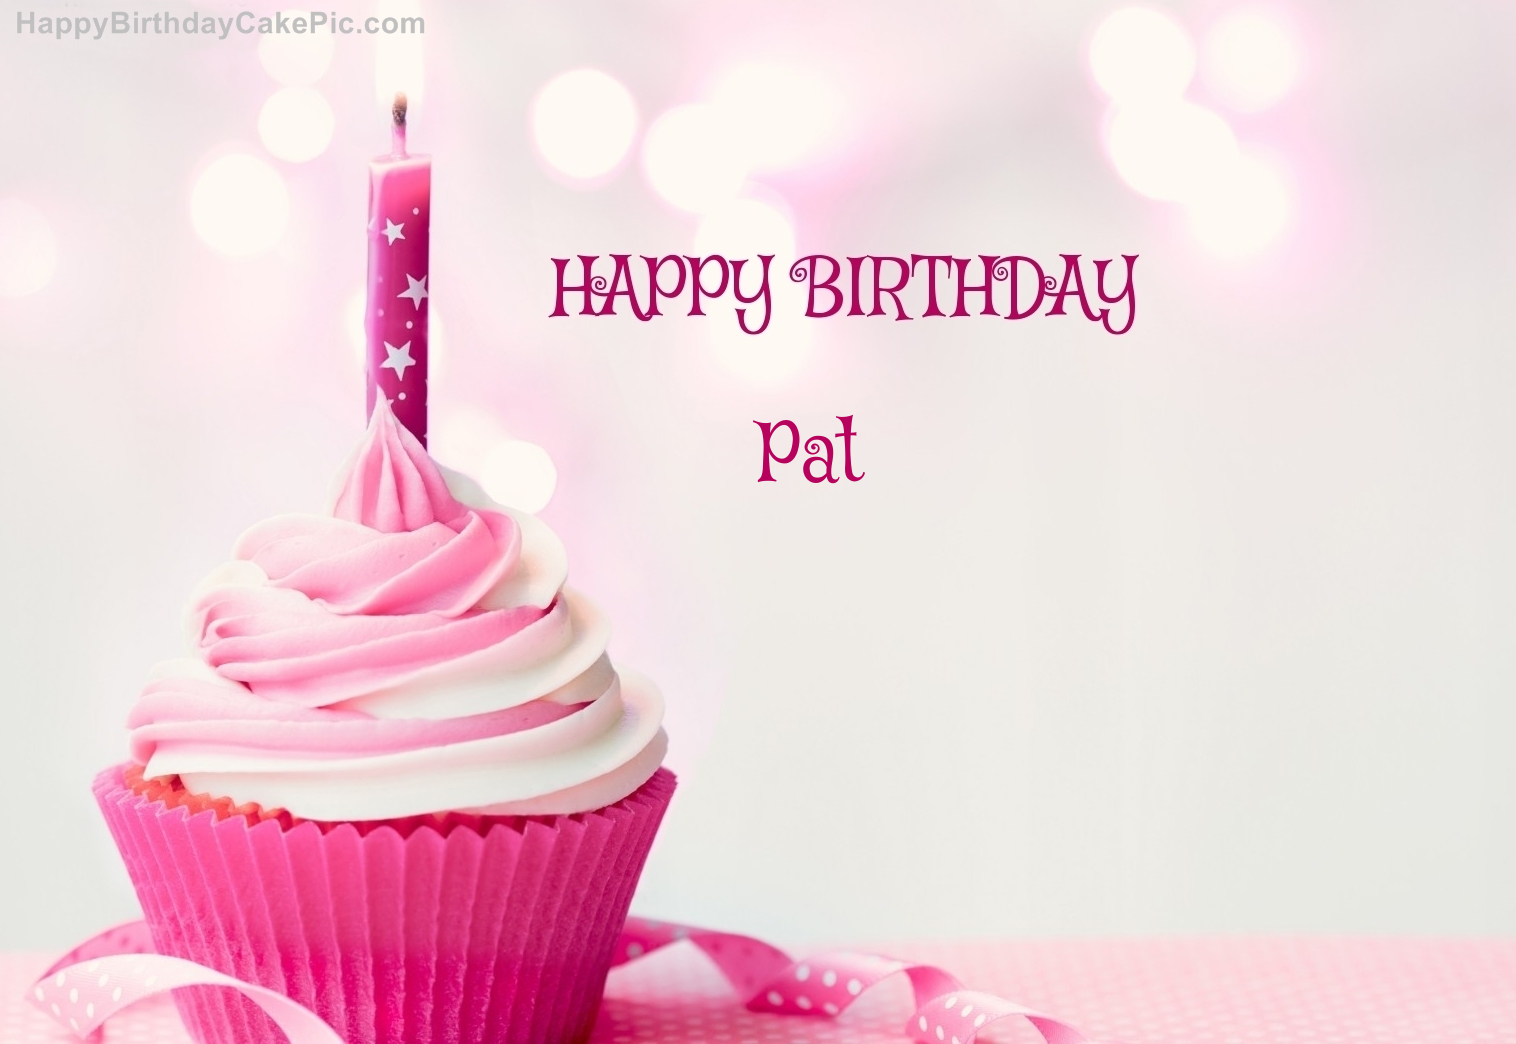 ️ Happy Birthday Cupcake Candle Pink Cake For Pat